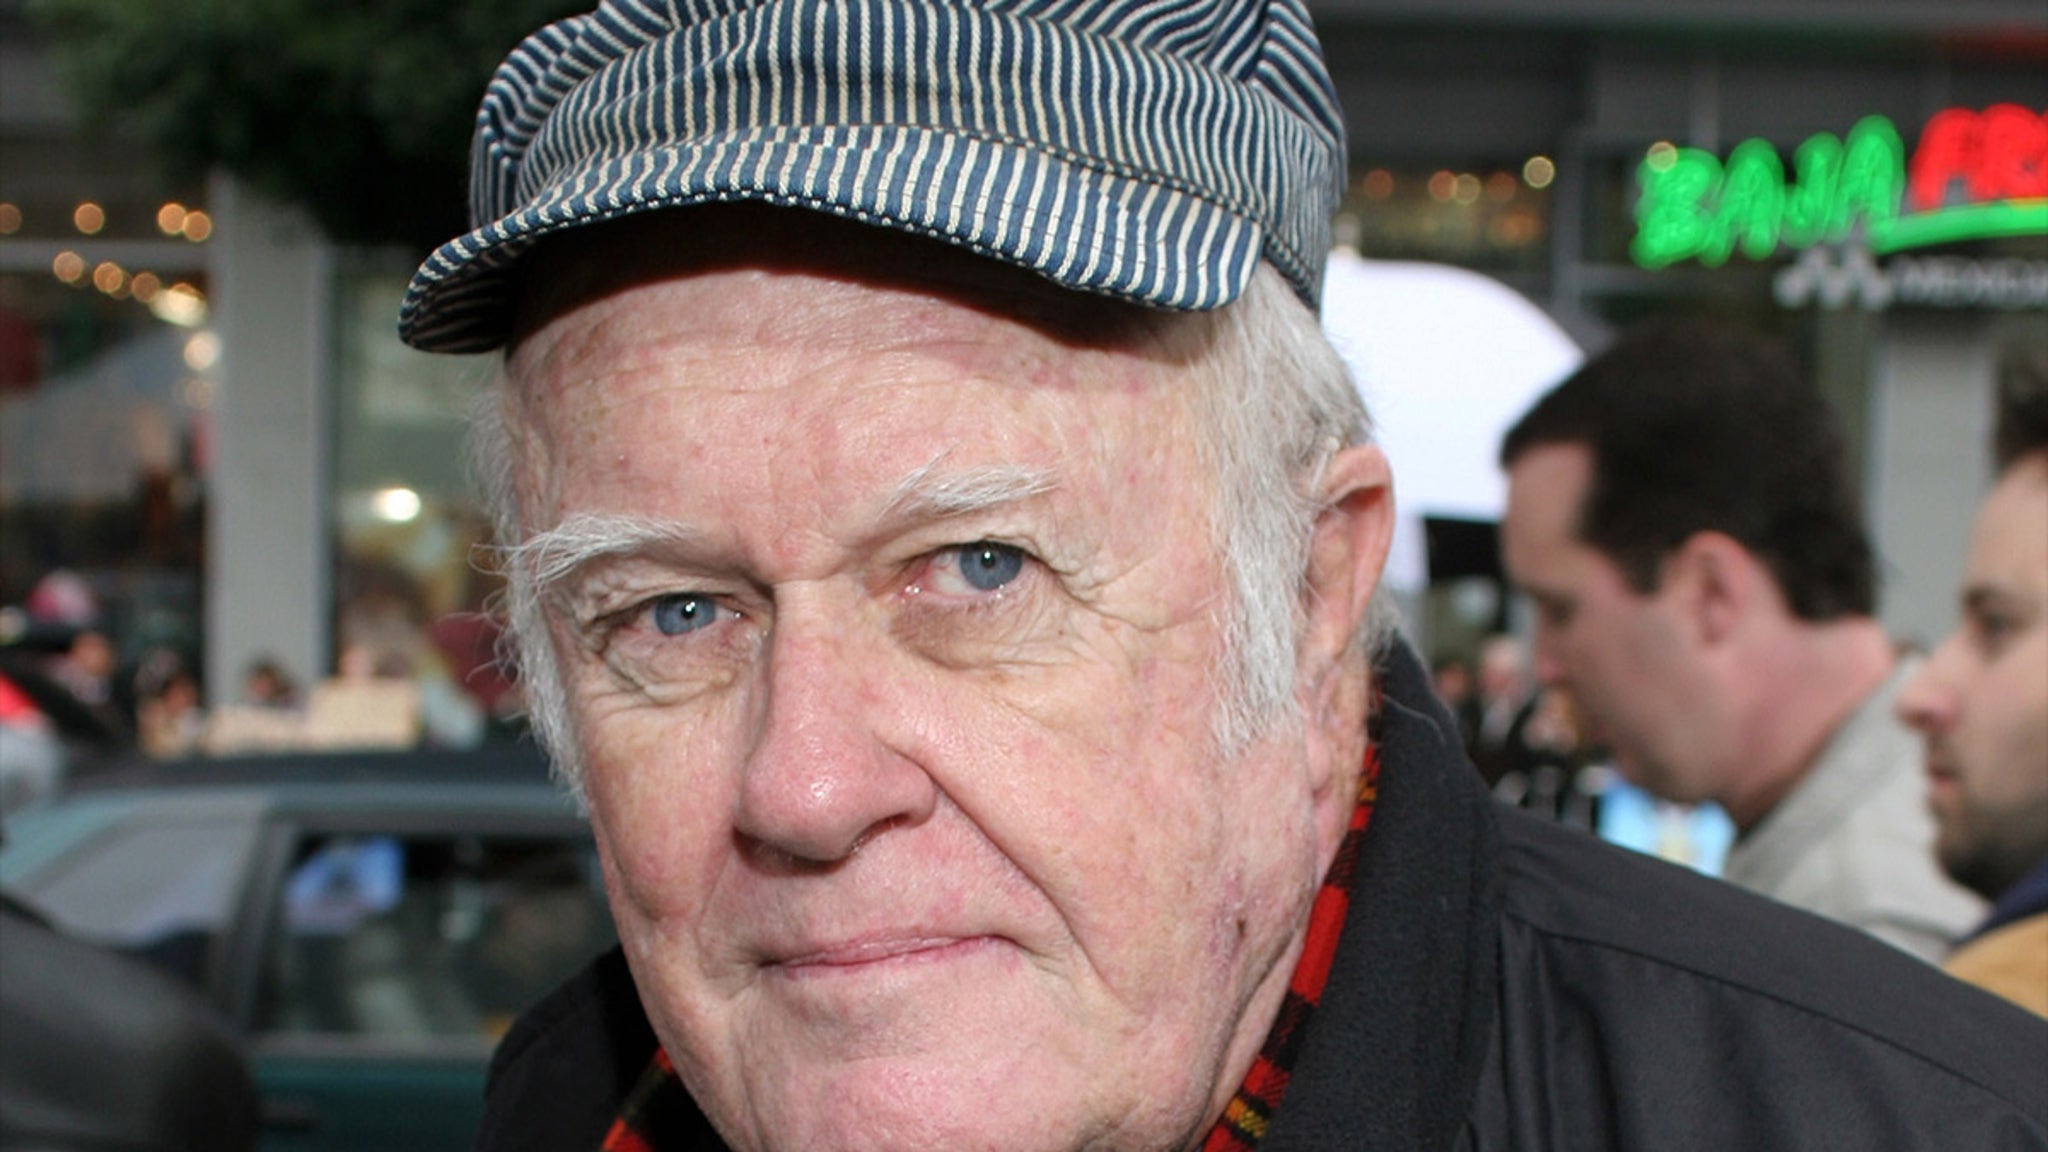 'Christmas With the Kranks' Star M. Emmet Walsh Dead at 88